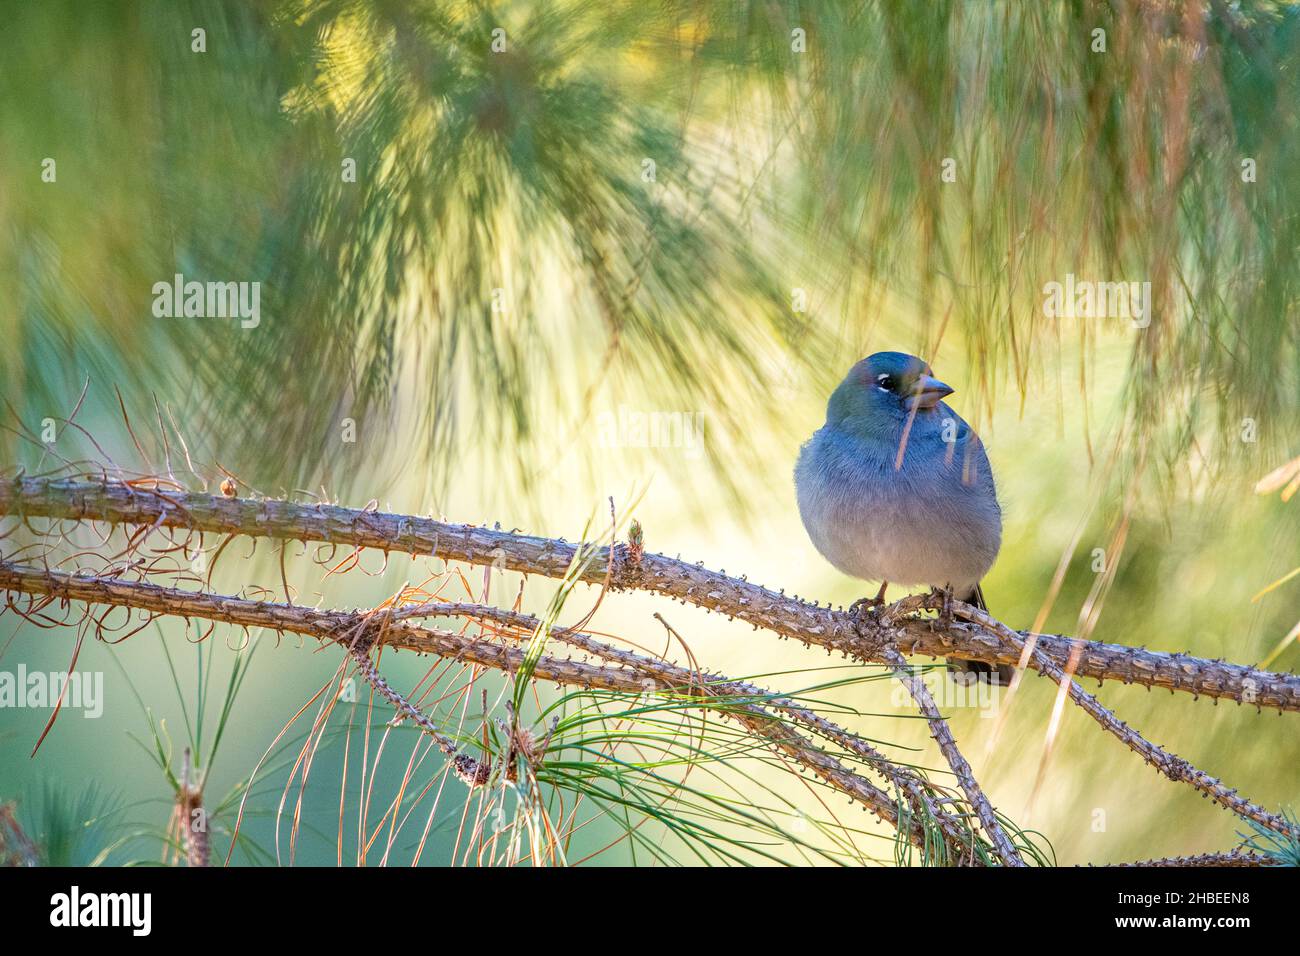 Tenerife blue chaffinch (Fringilla teydea teydea), male of the nominal subspecies endemic to Tenerife. Stock Photo